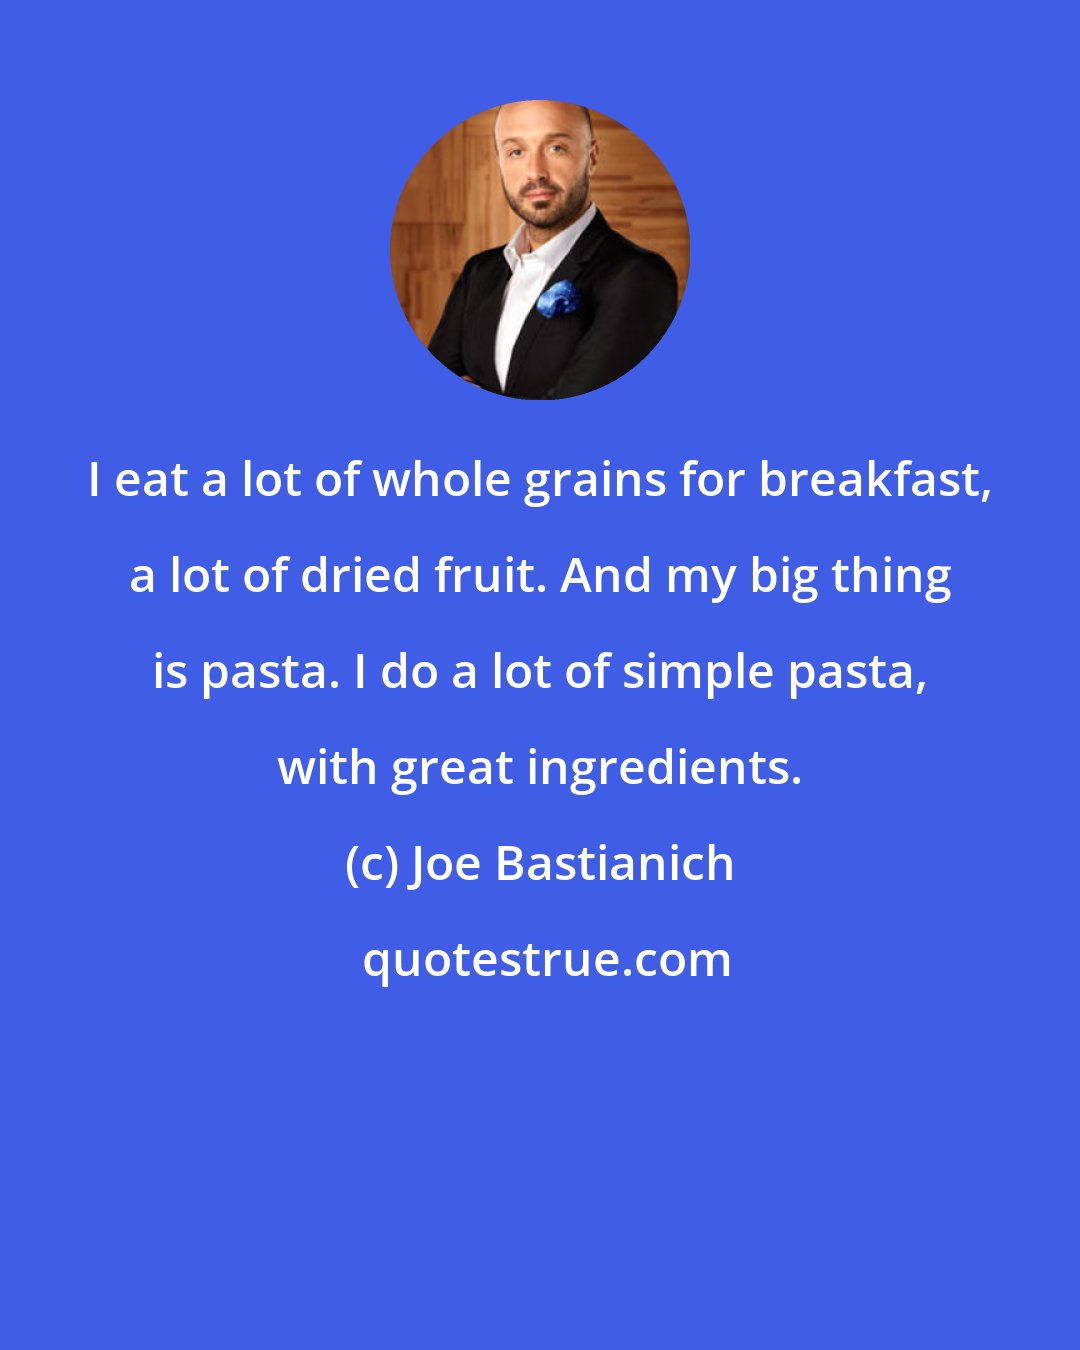 Joe Bastianich: I eat a lot of whole grains for breakfast, a lot of dried fruit. And my big thing is pasta. I do a lot of simple pasta, with great ingredients.